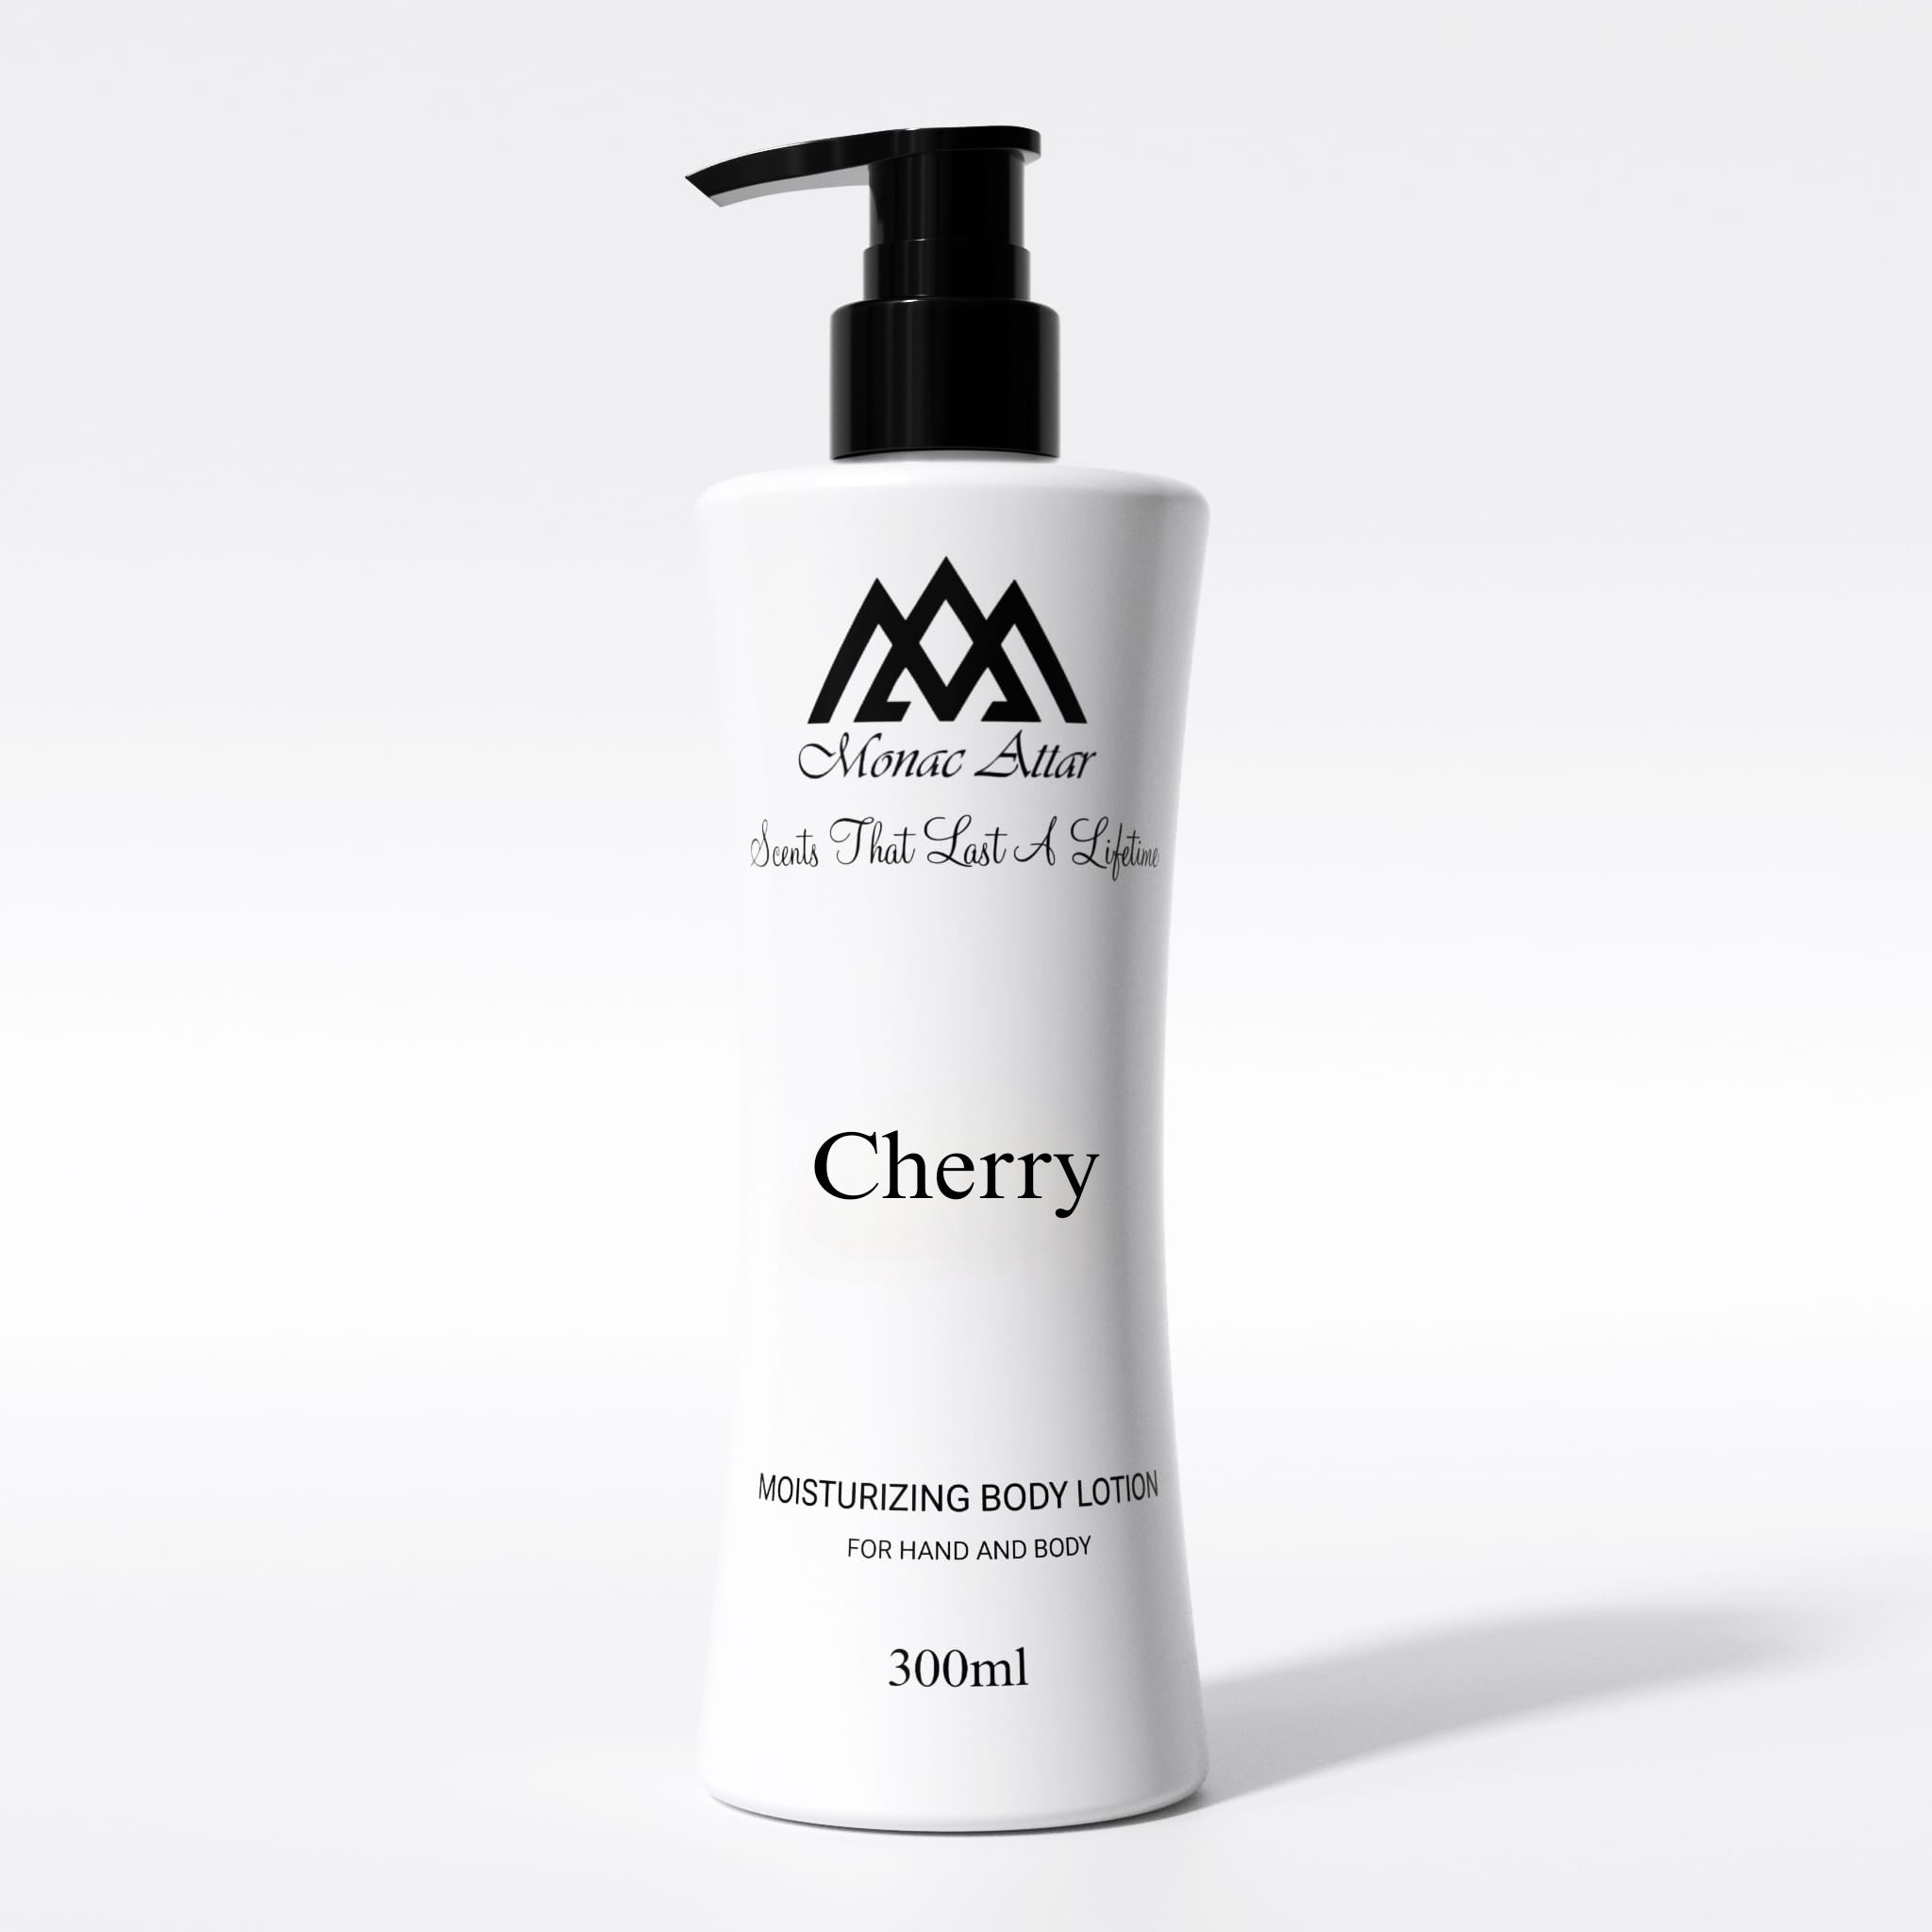 Cherry Body Lotion Inspired by Tom Ford Lost Cherry